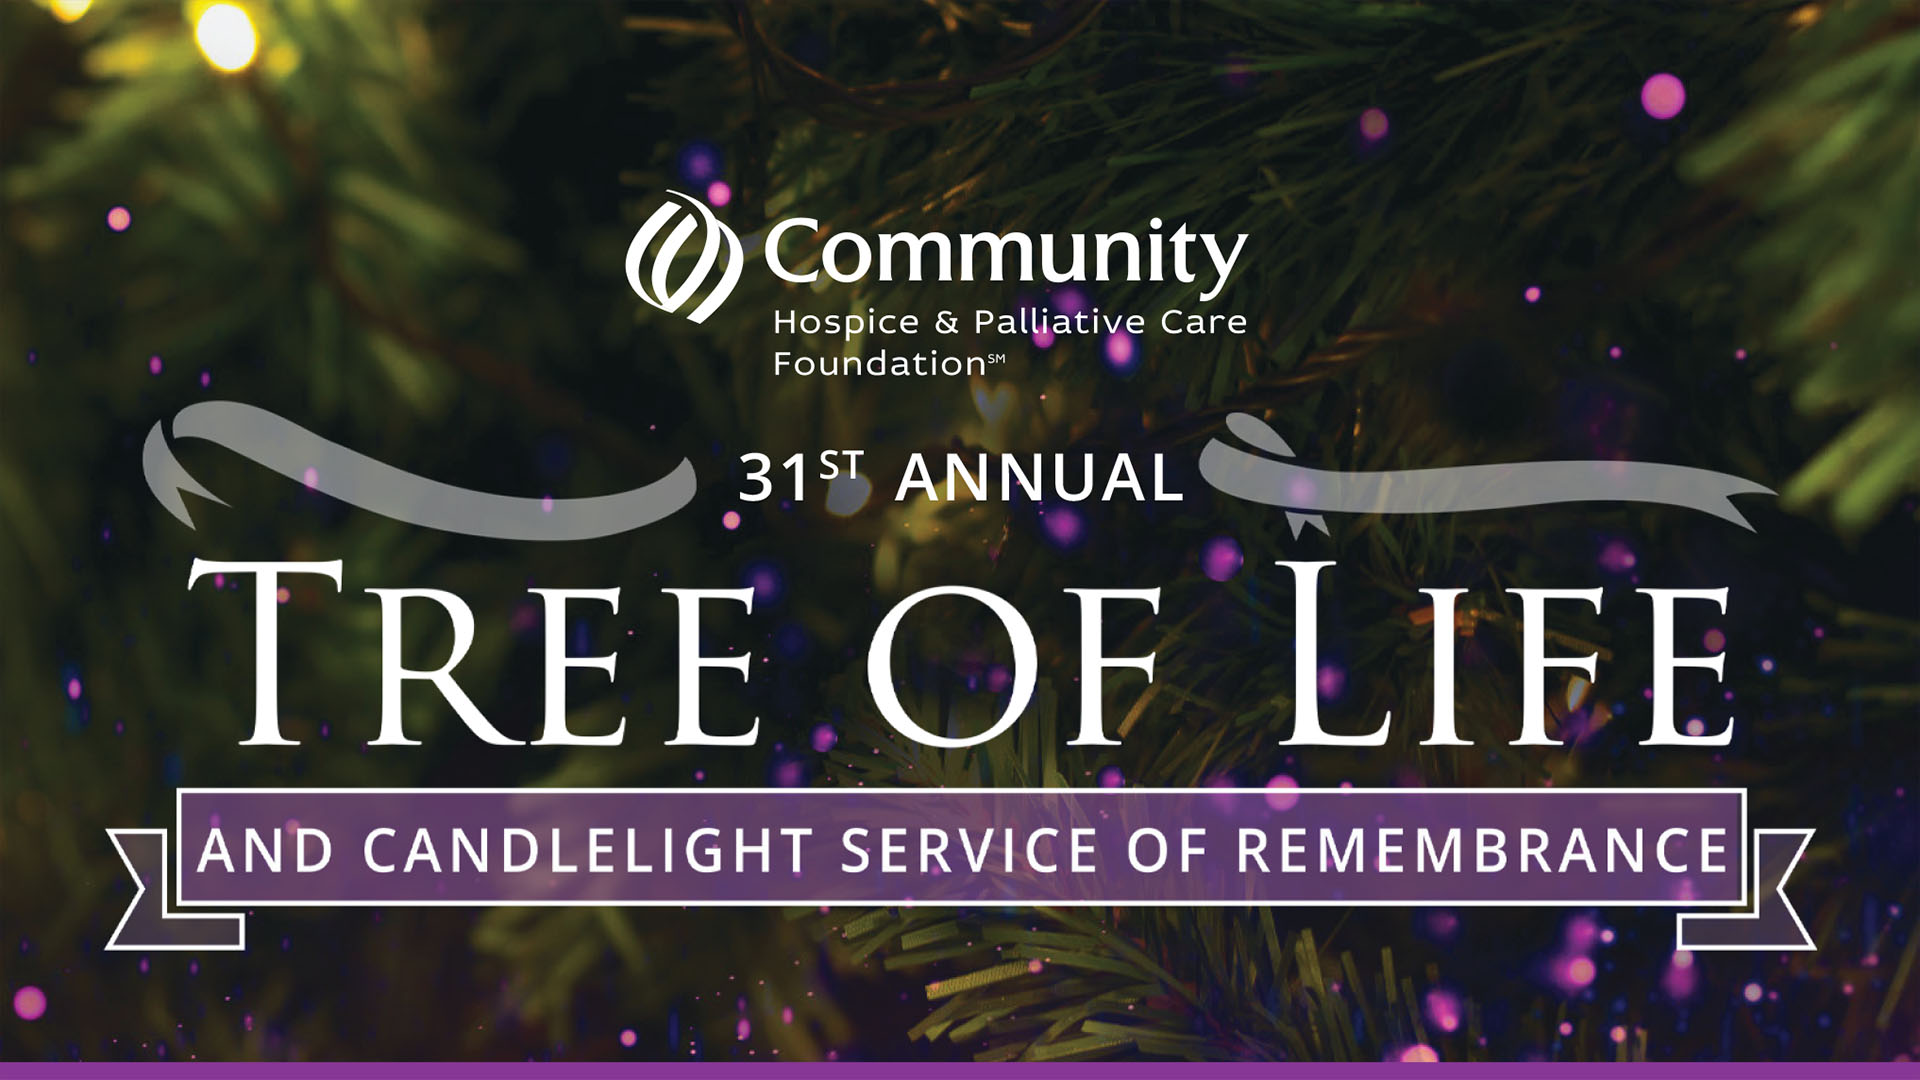 Tree of Life and Candlelight Service of Remembrance